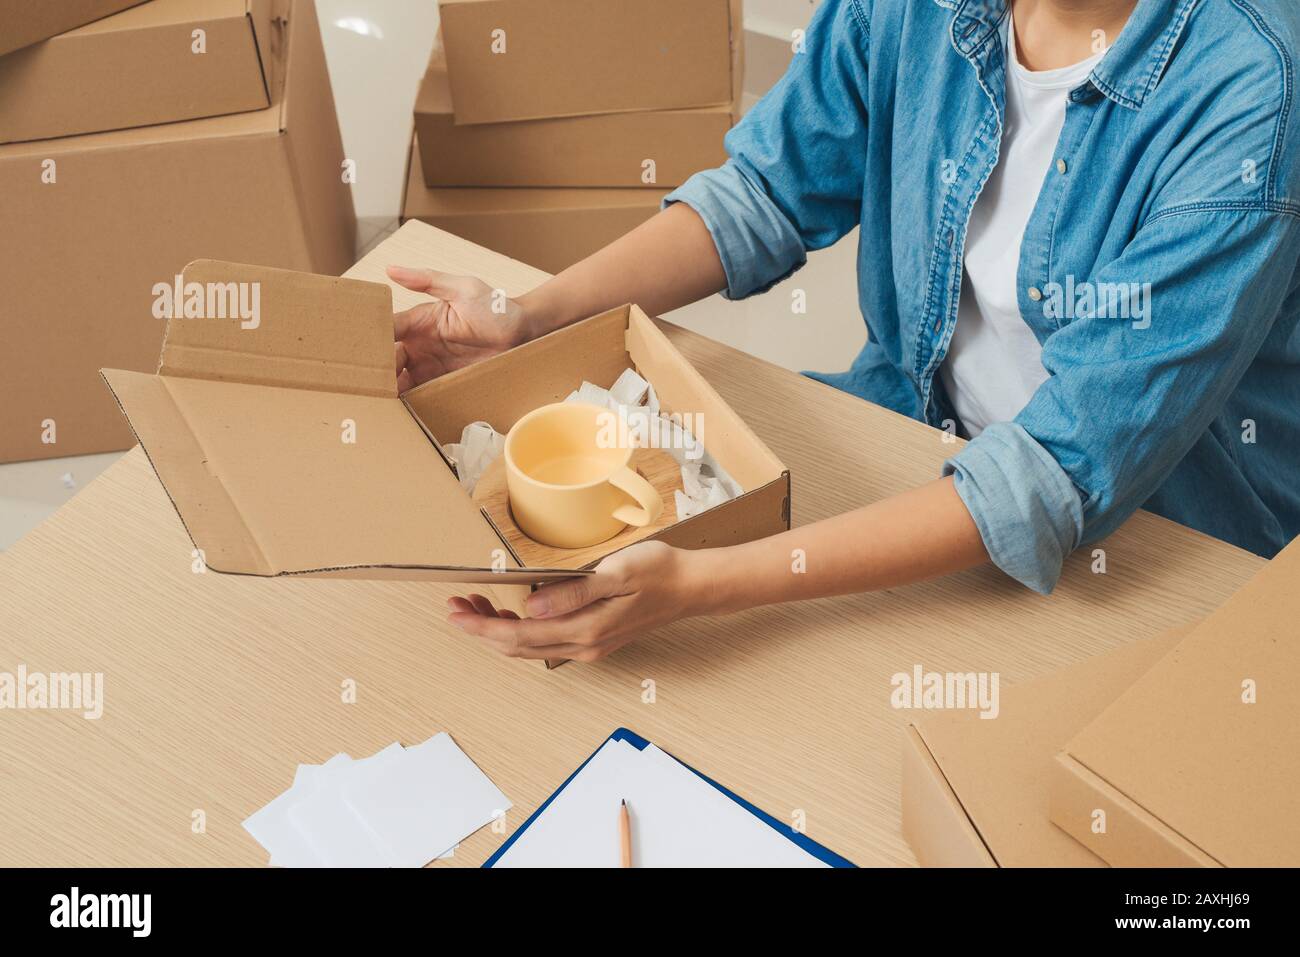 Courier hands packaging parcel at table Stock Photo